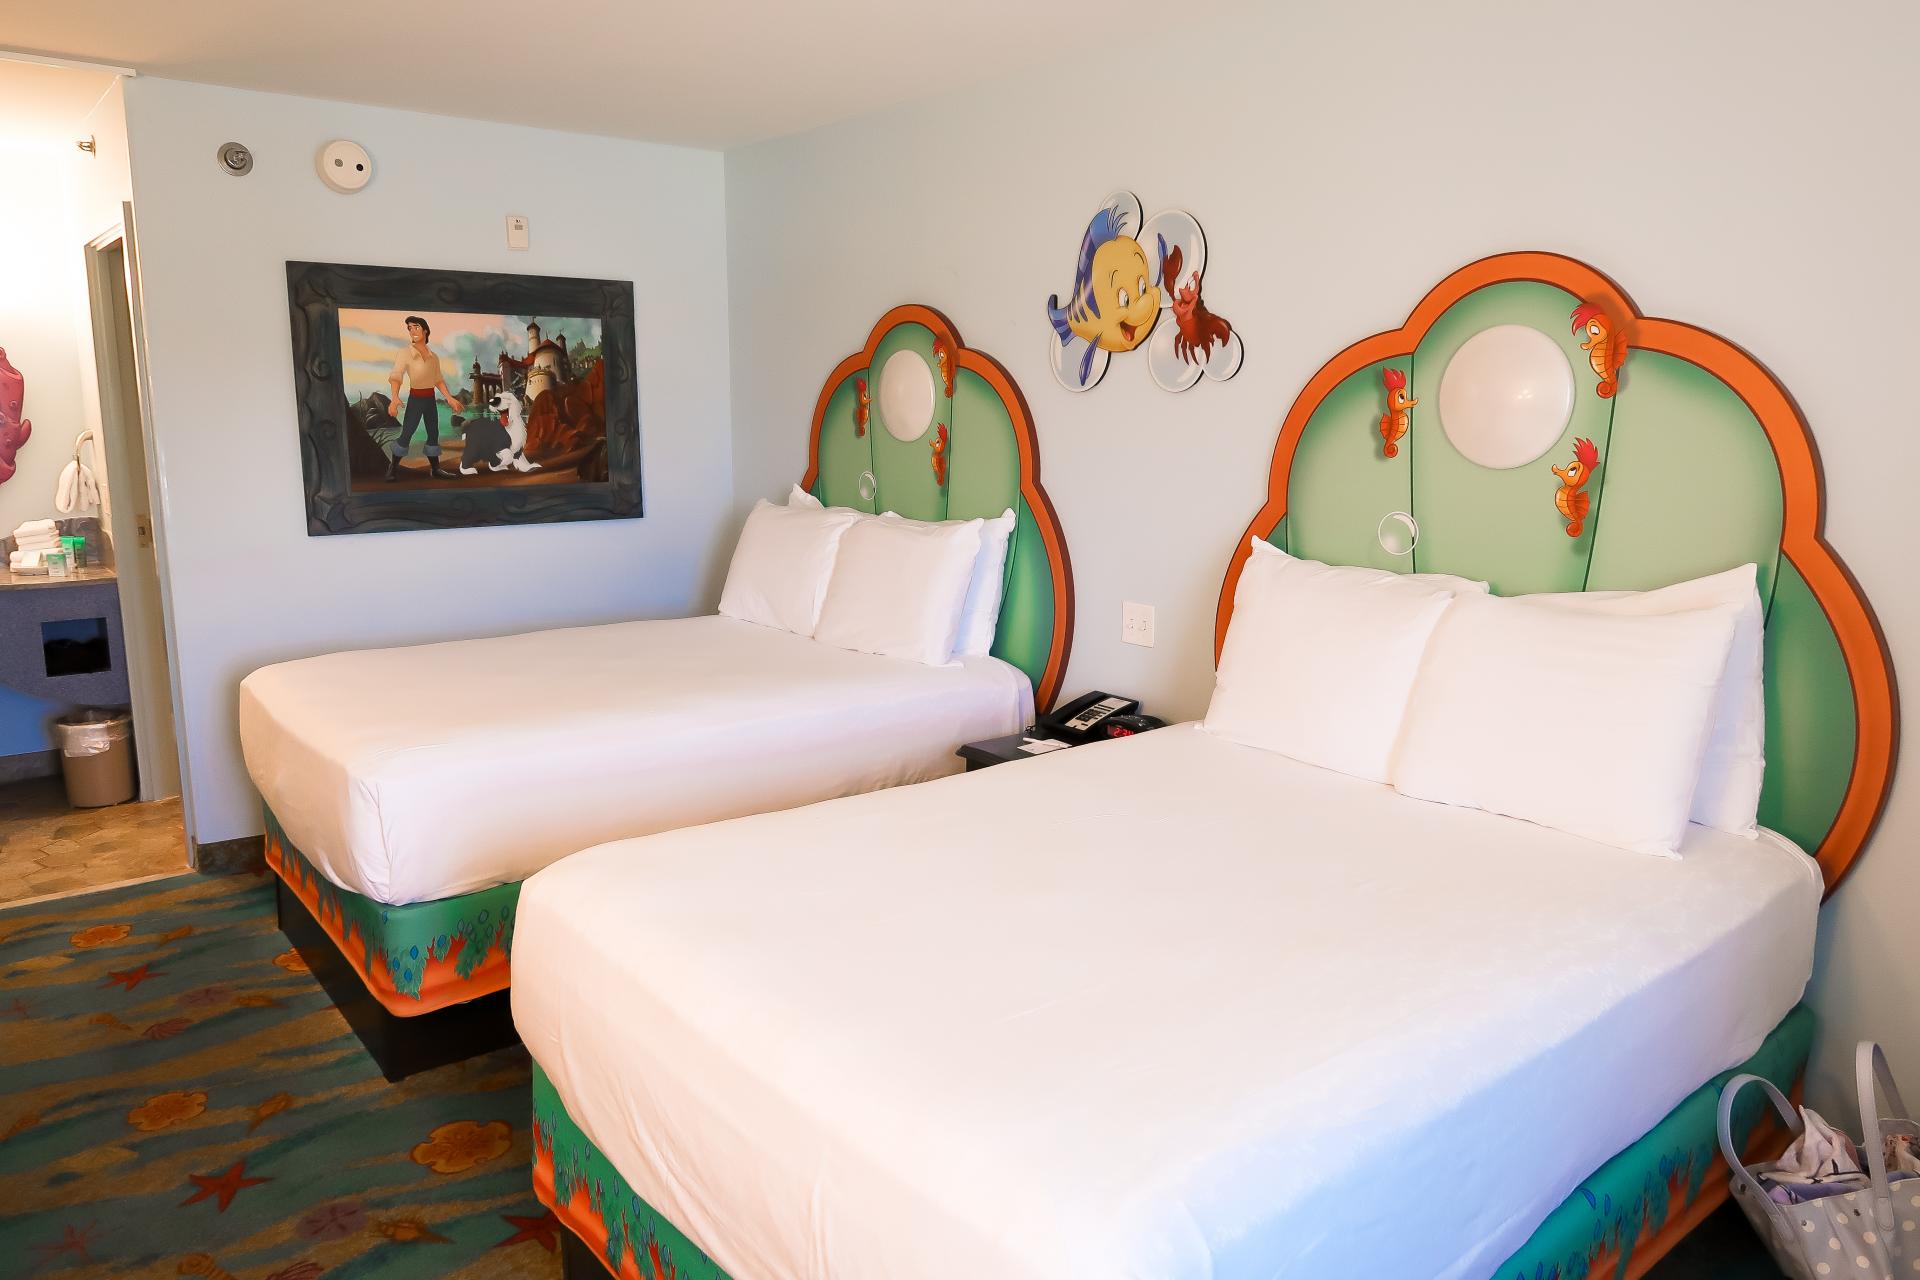 Staying at Disney's Art of Animation Resort The Little